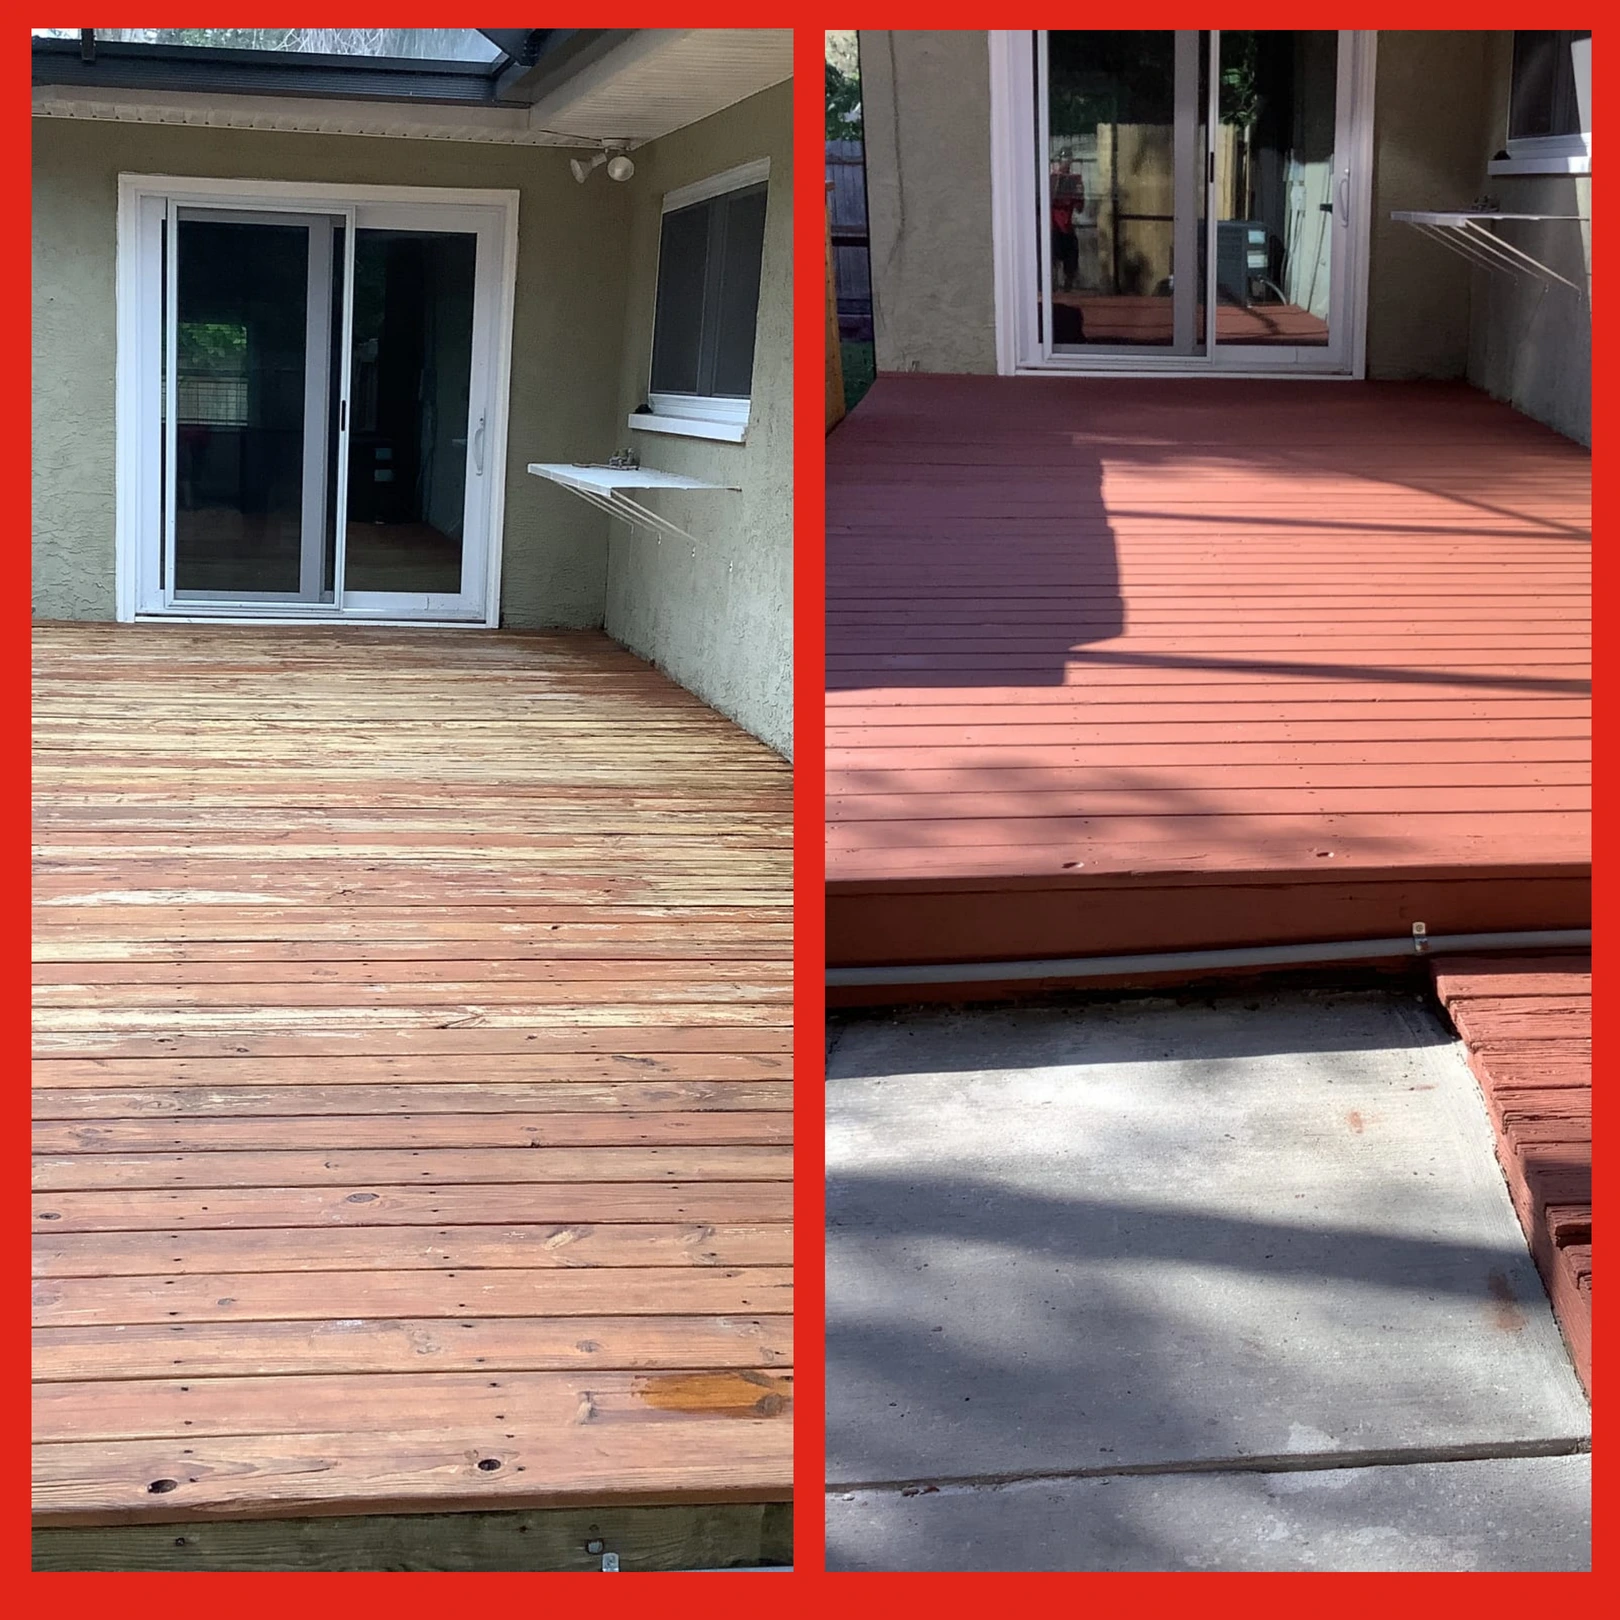 A worn, weathered deck and the final results of the deck repair and refinishing completed by Mr. Handyman.